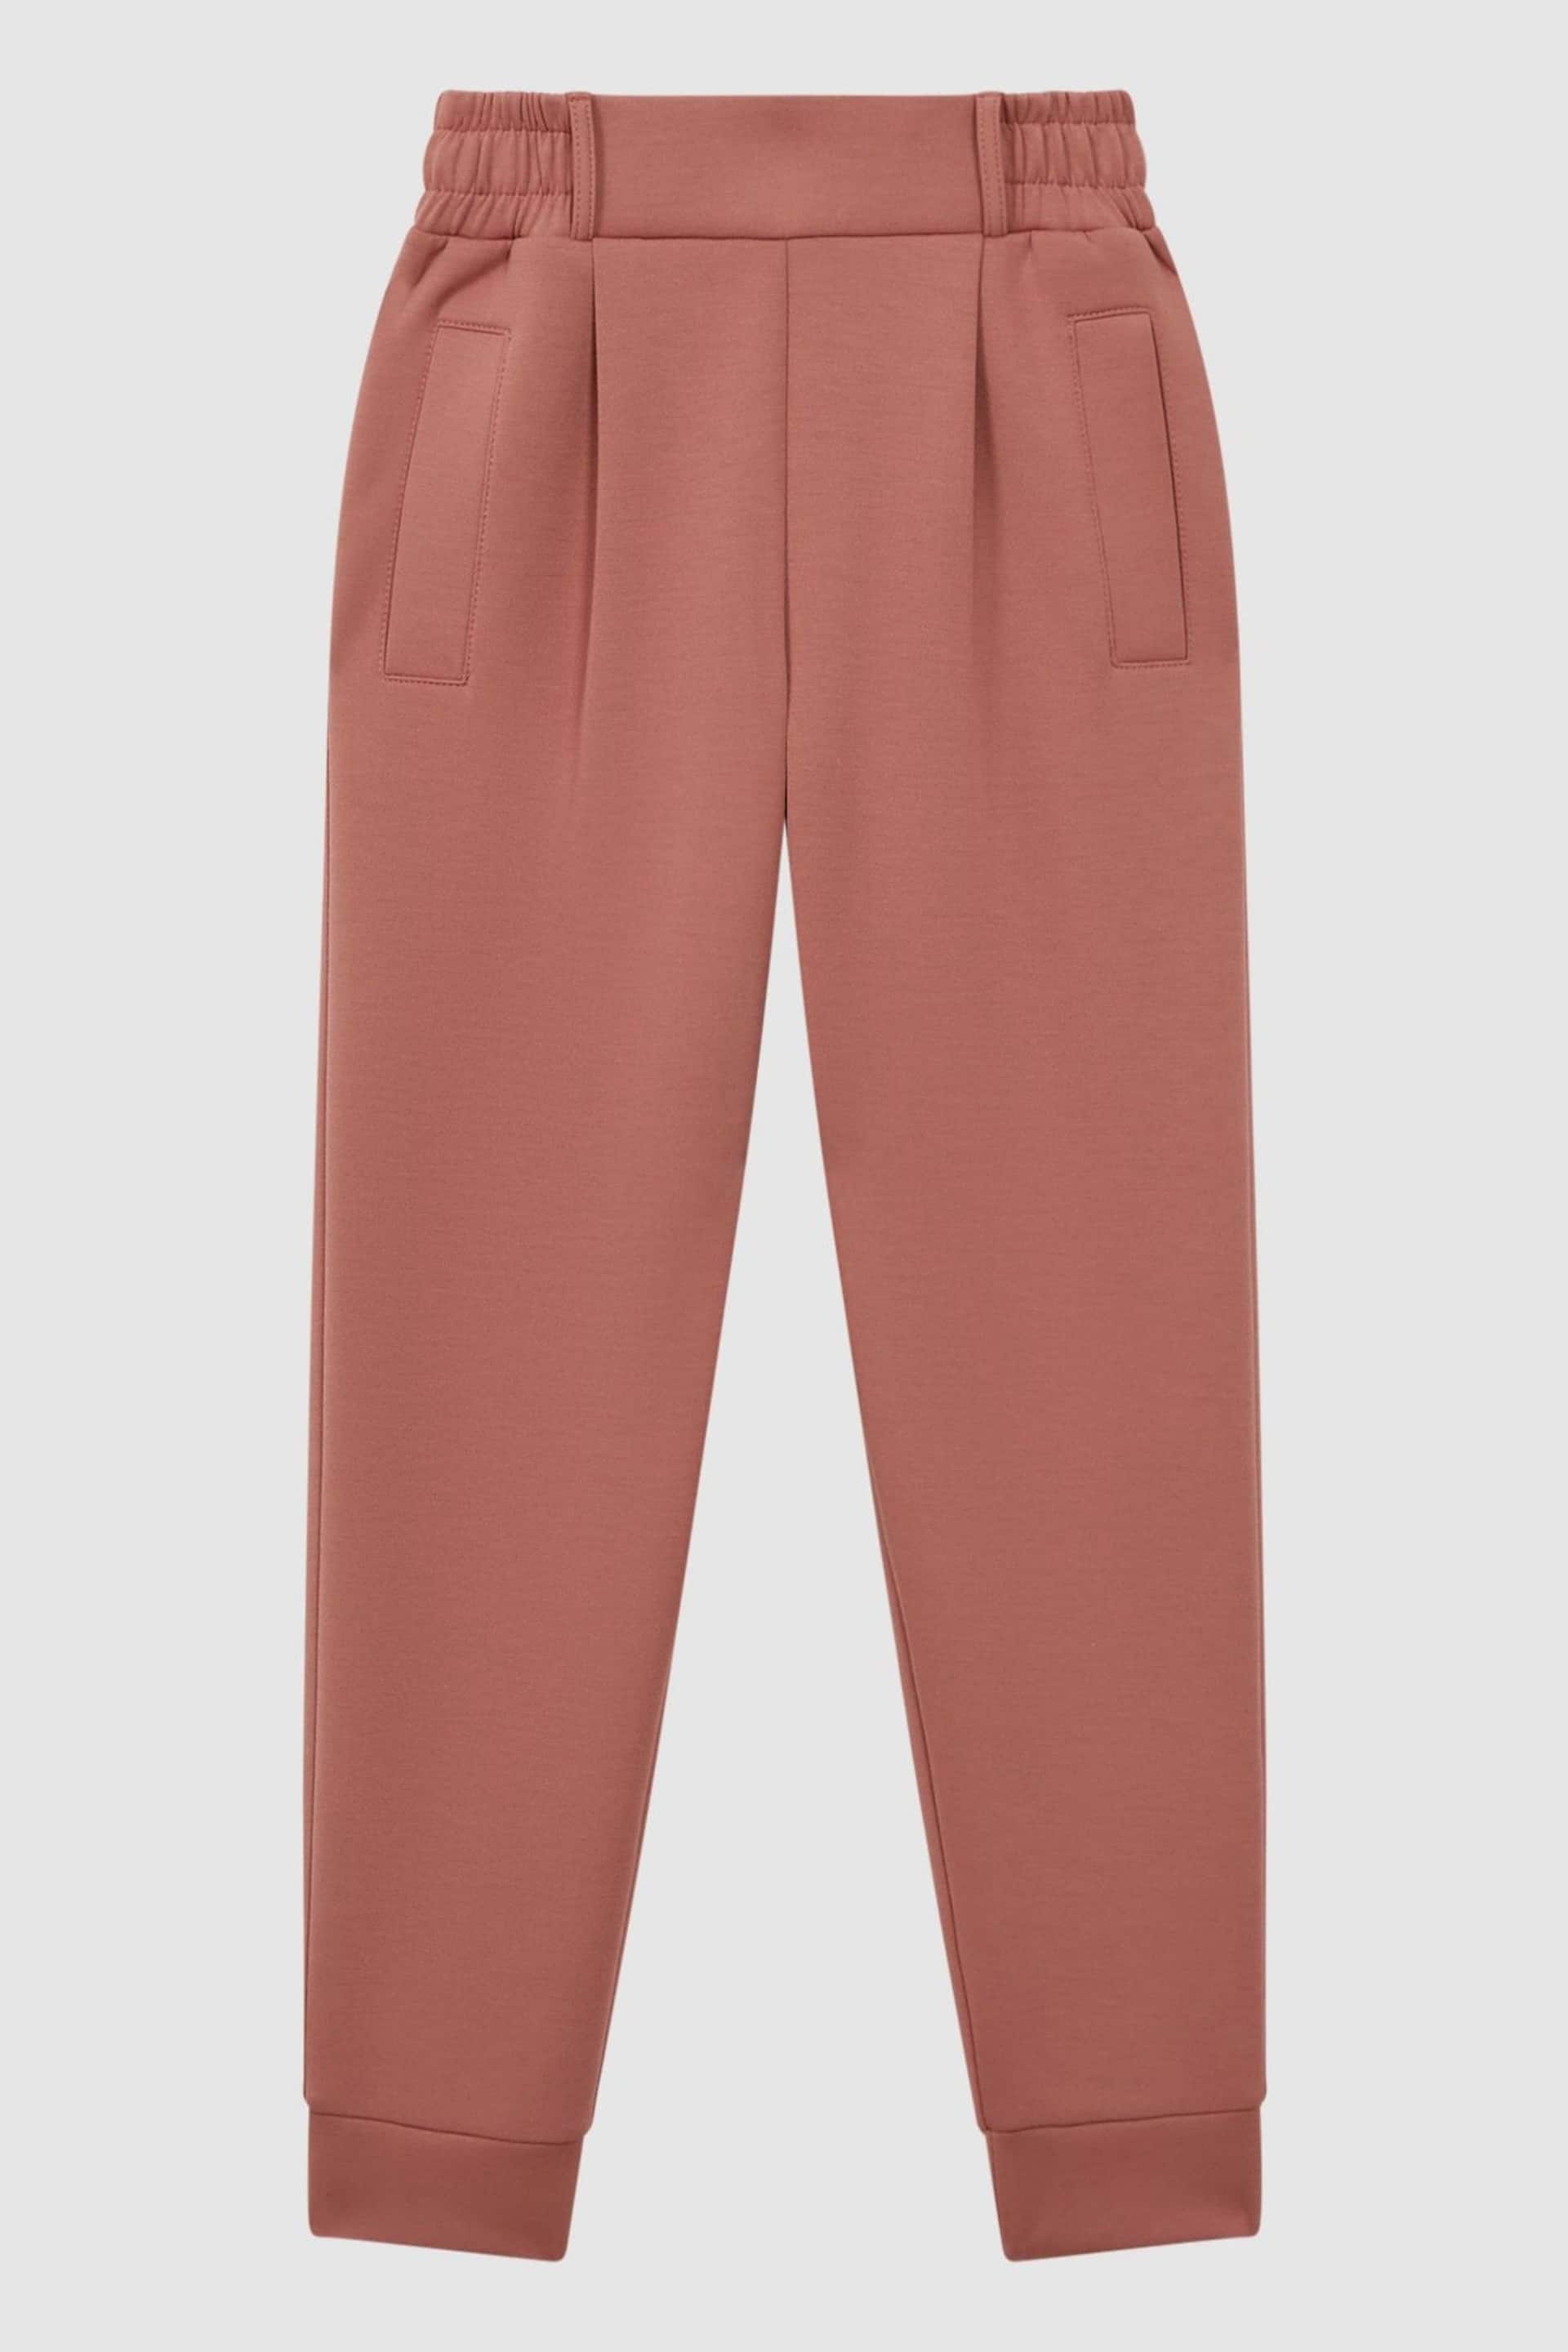 Reiss Mink Seren Senior High Rise Elasticated Jersey Trousers - Image 2 of 6